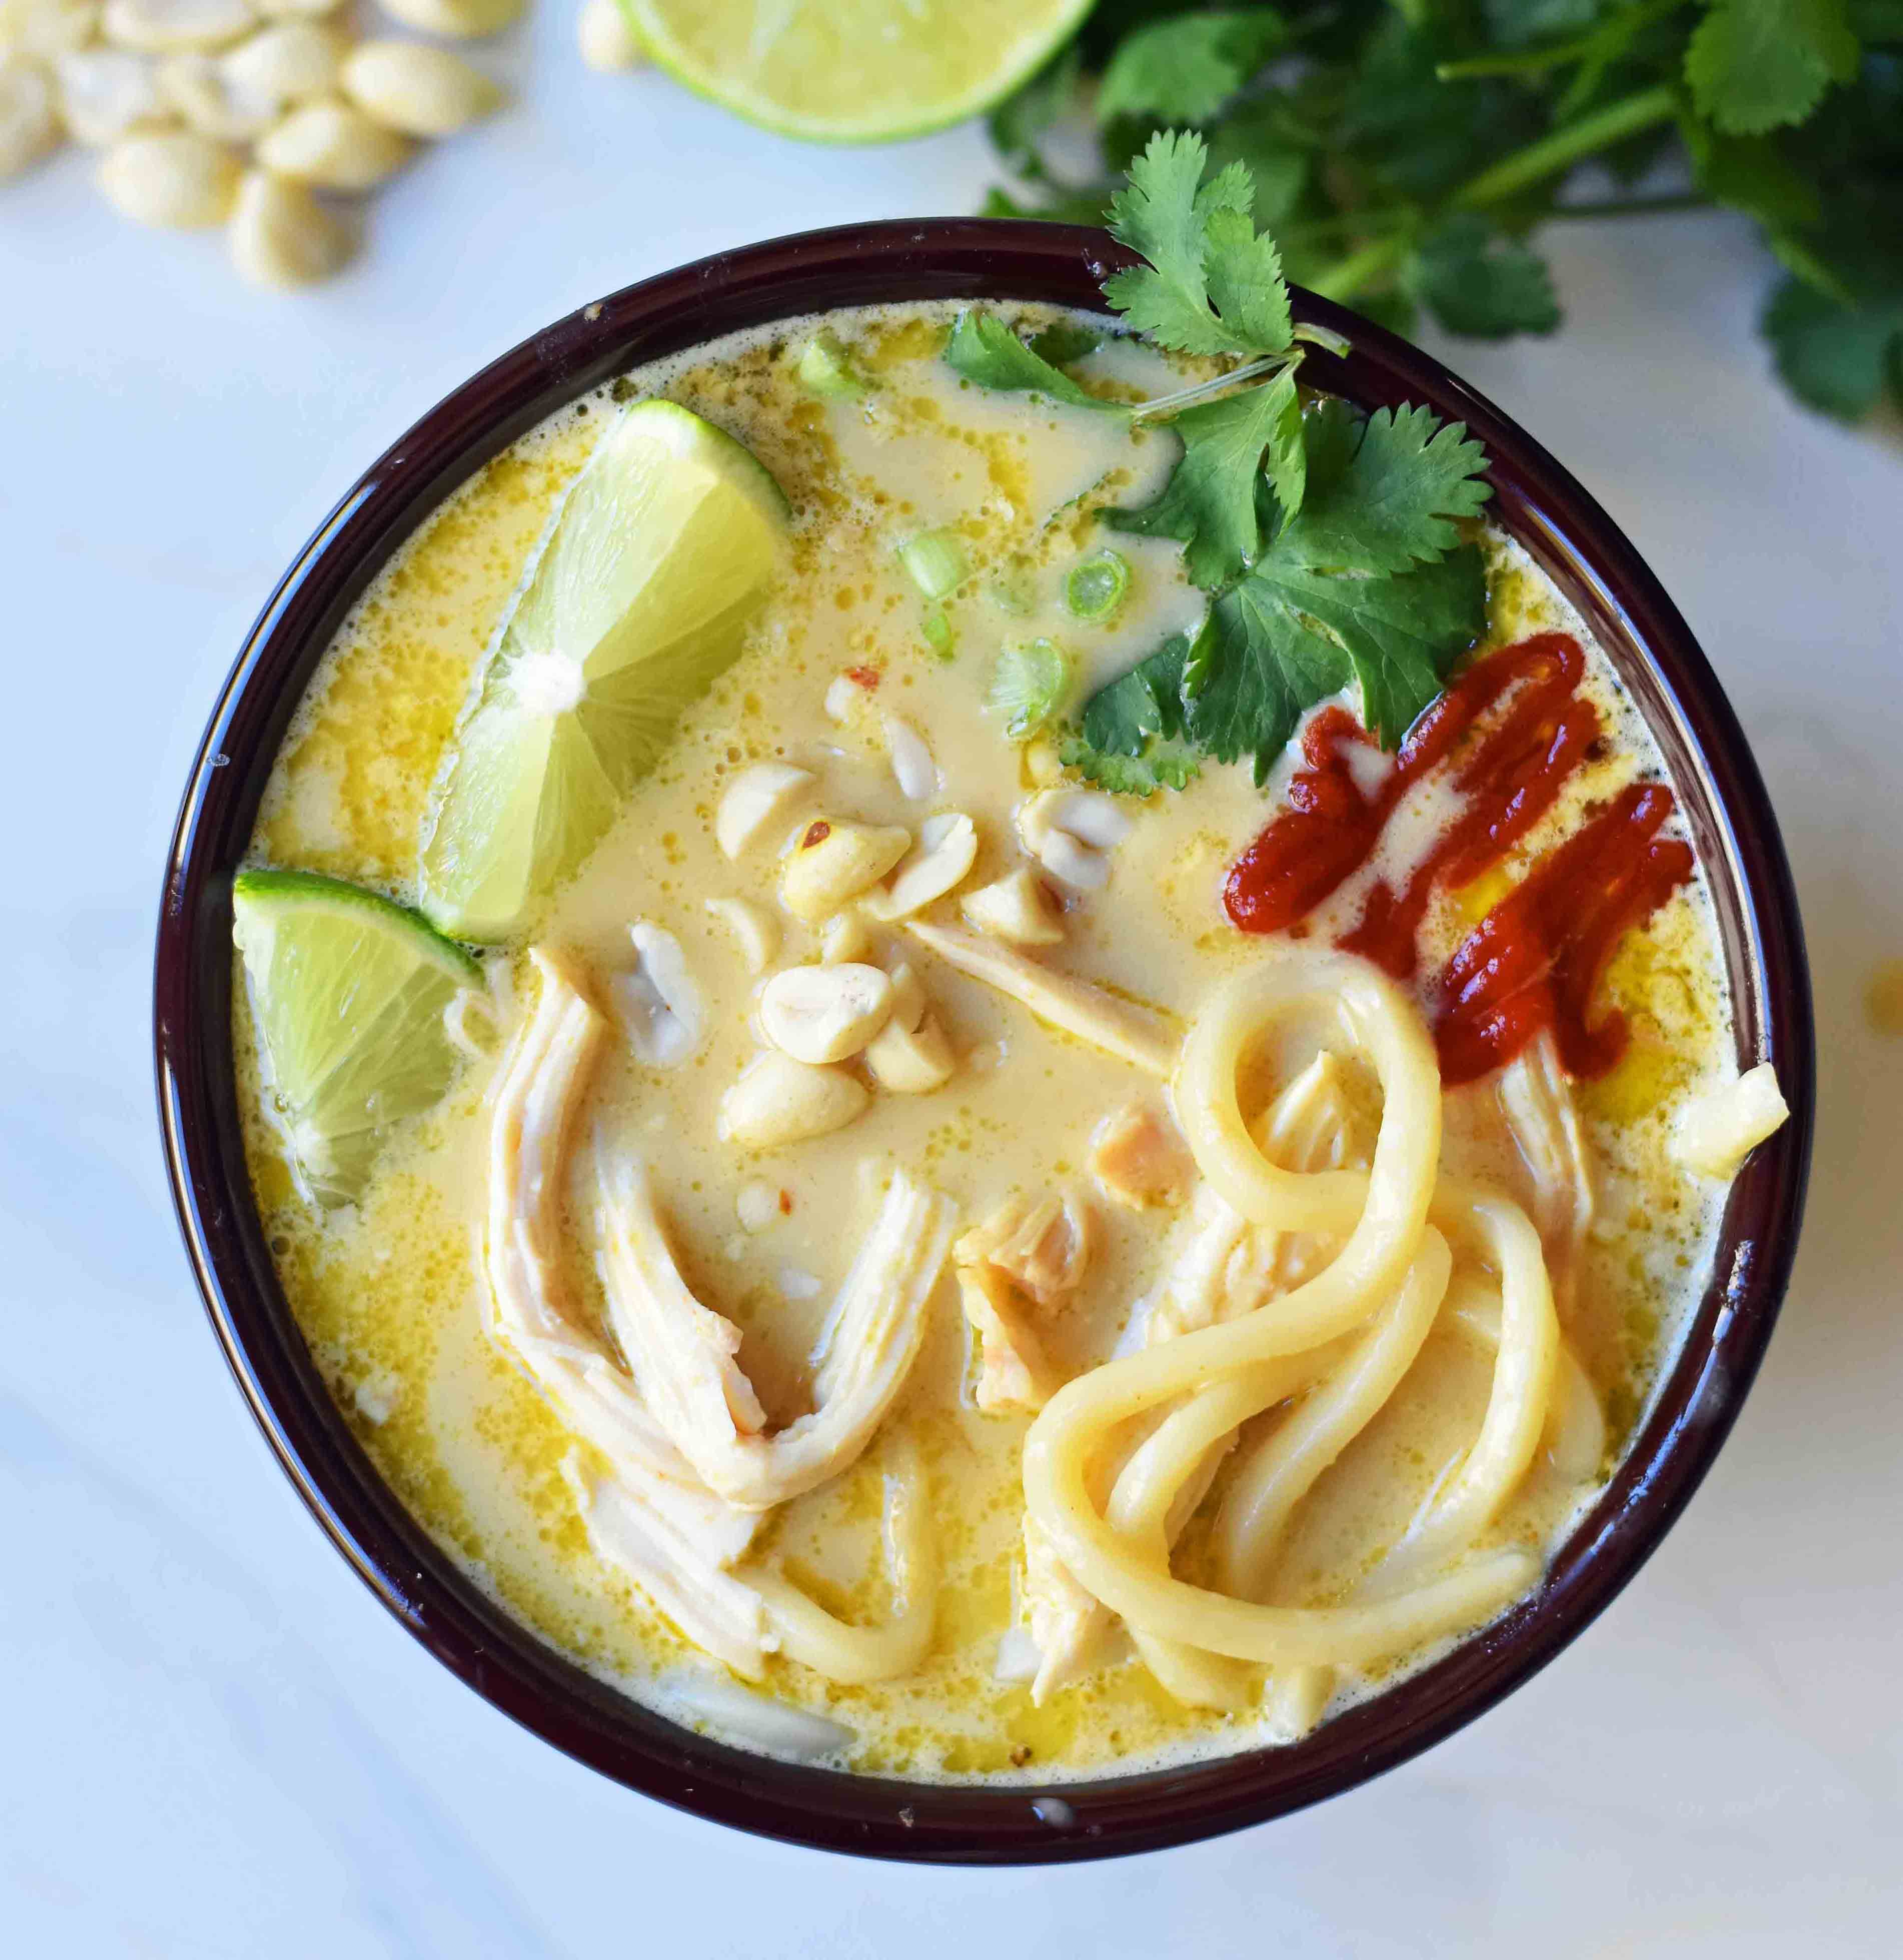 Coconut Curry Noodle Bowls. These Thai Curry Noodles are gluten-free and dairy-free and made in less than 30 minutes. A quick and easy 30-minute meal which is full of flavor. www.modernhoney.com